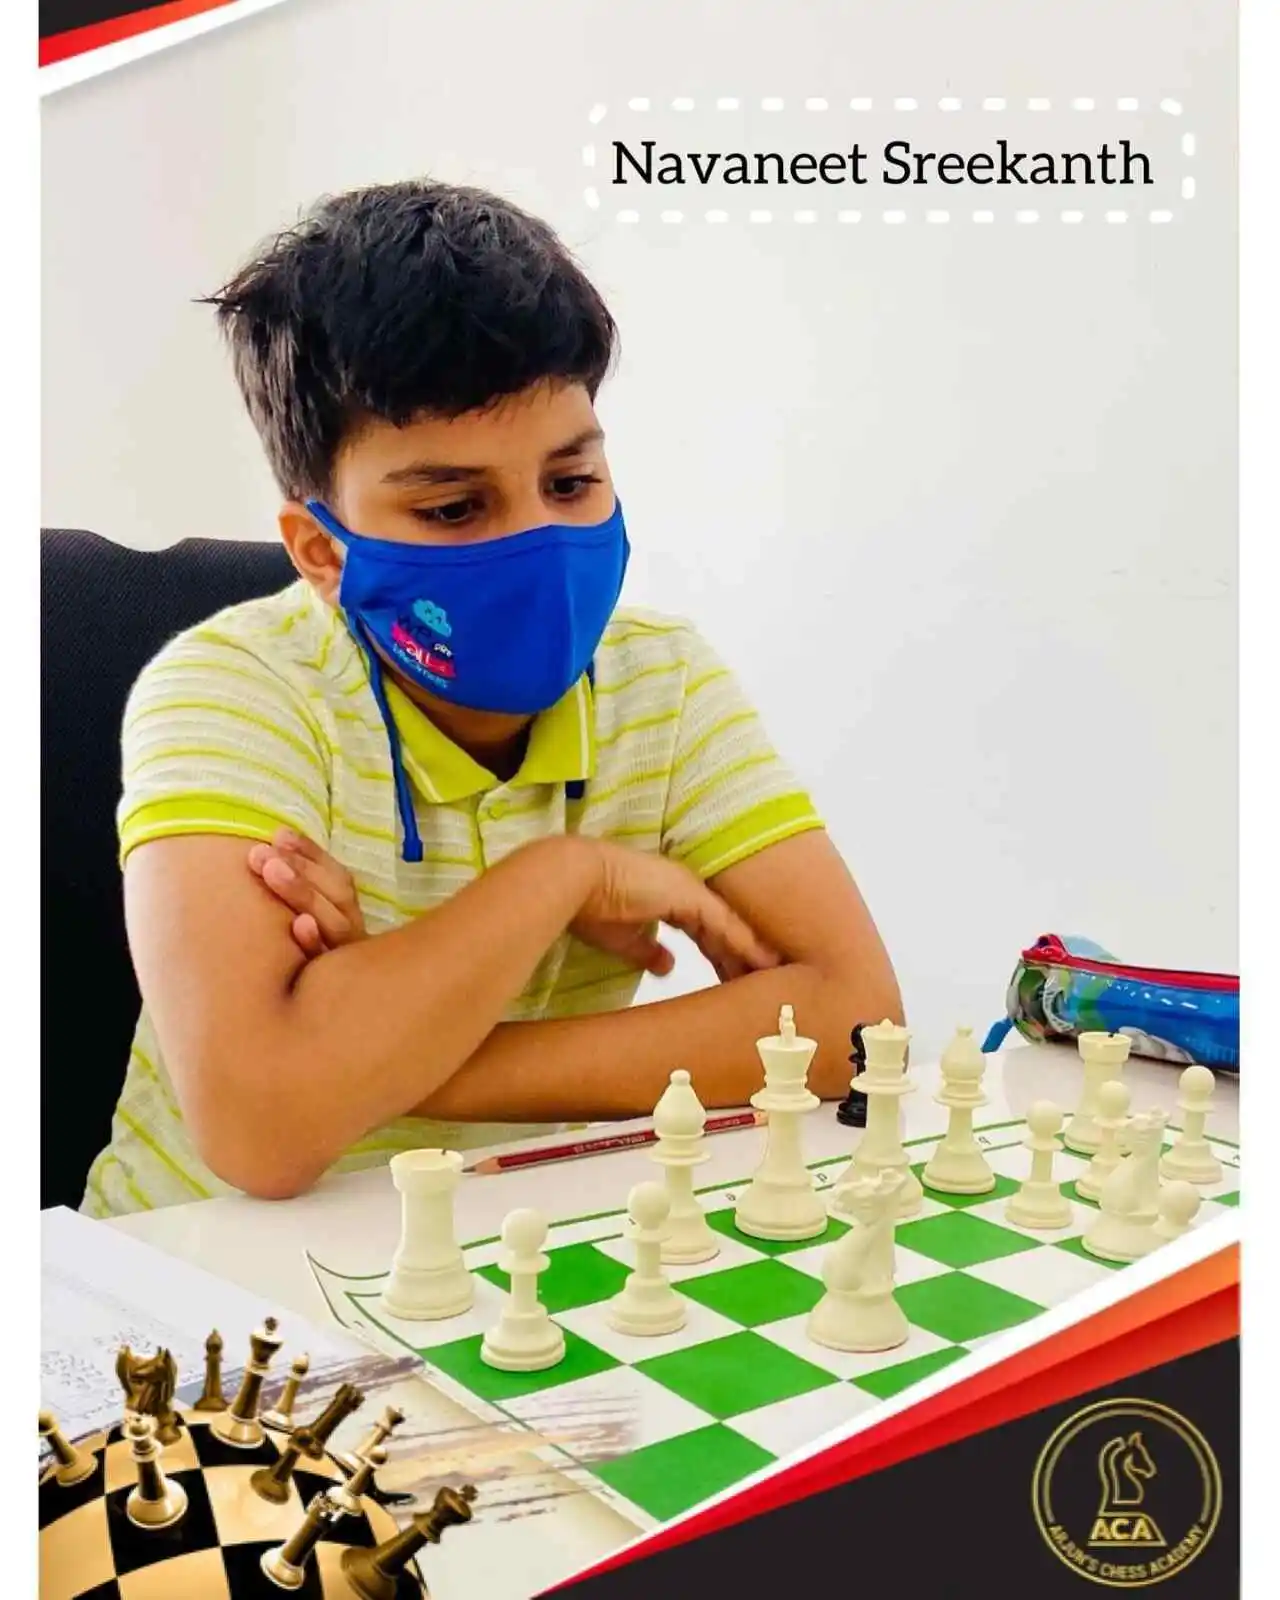 Students Achievements (Before May 2023) - Navaneet Sreekanth won his FIDE rating